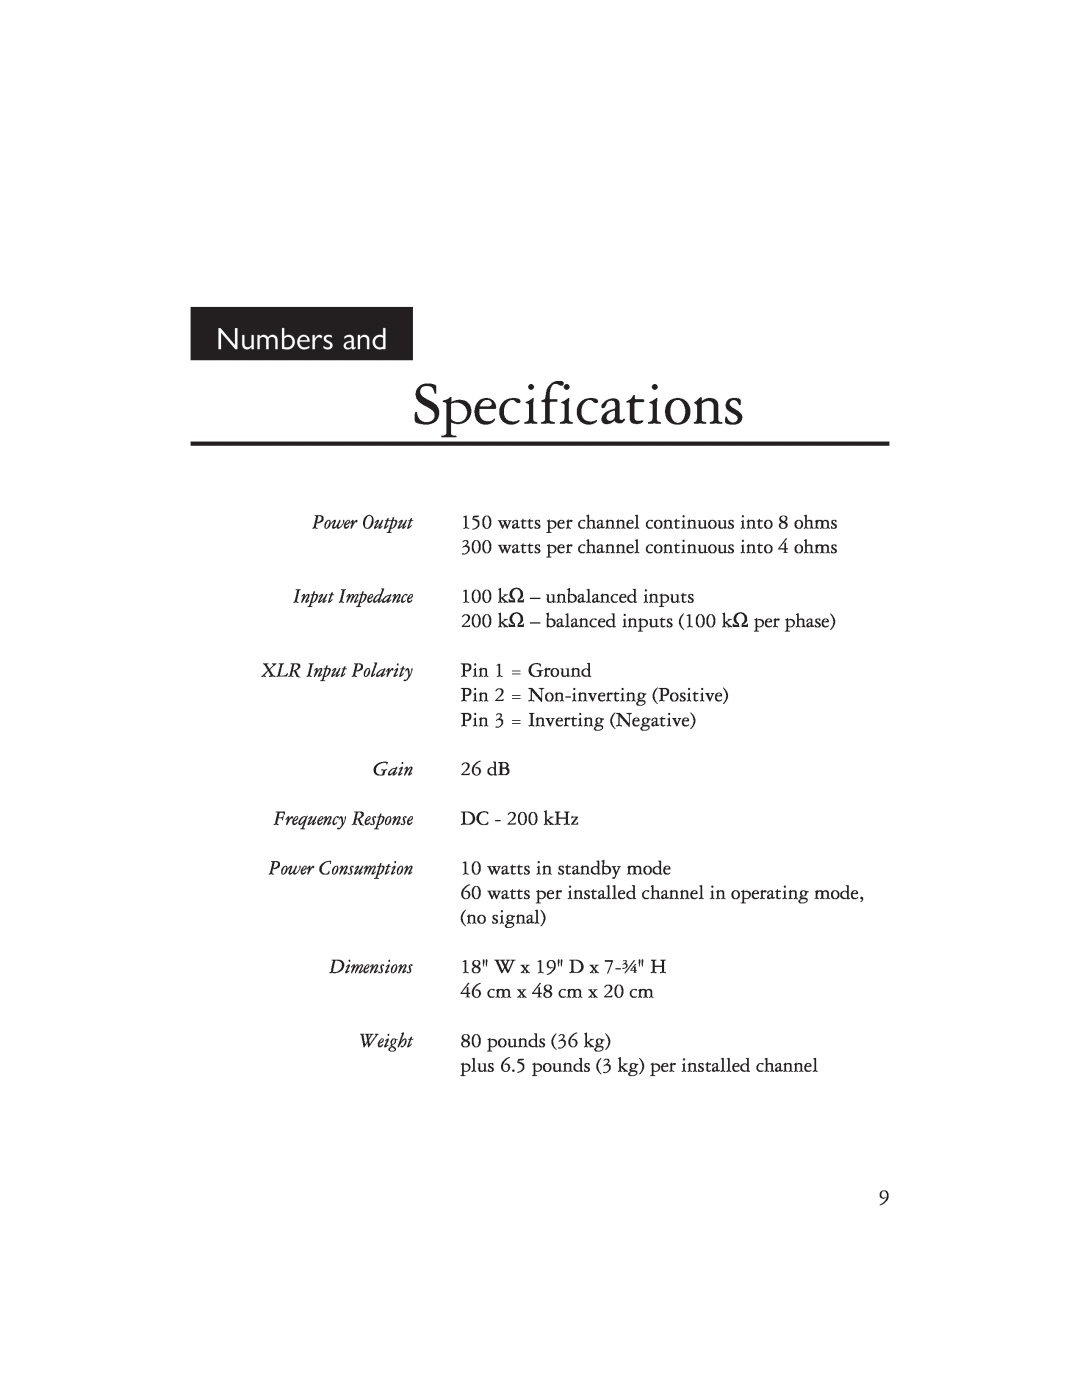 Ayre Acoustics V-6x owner manual Specifications, Numbers and 